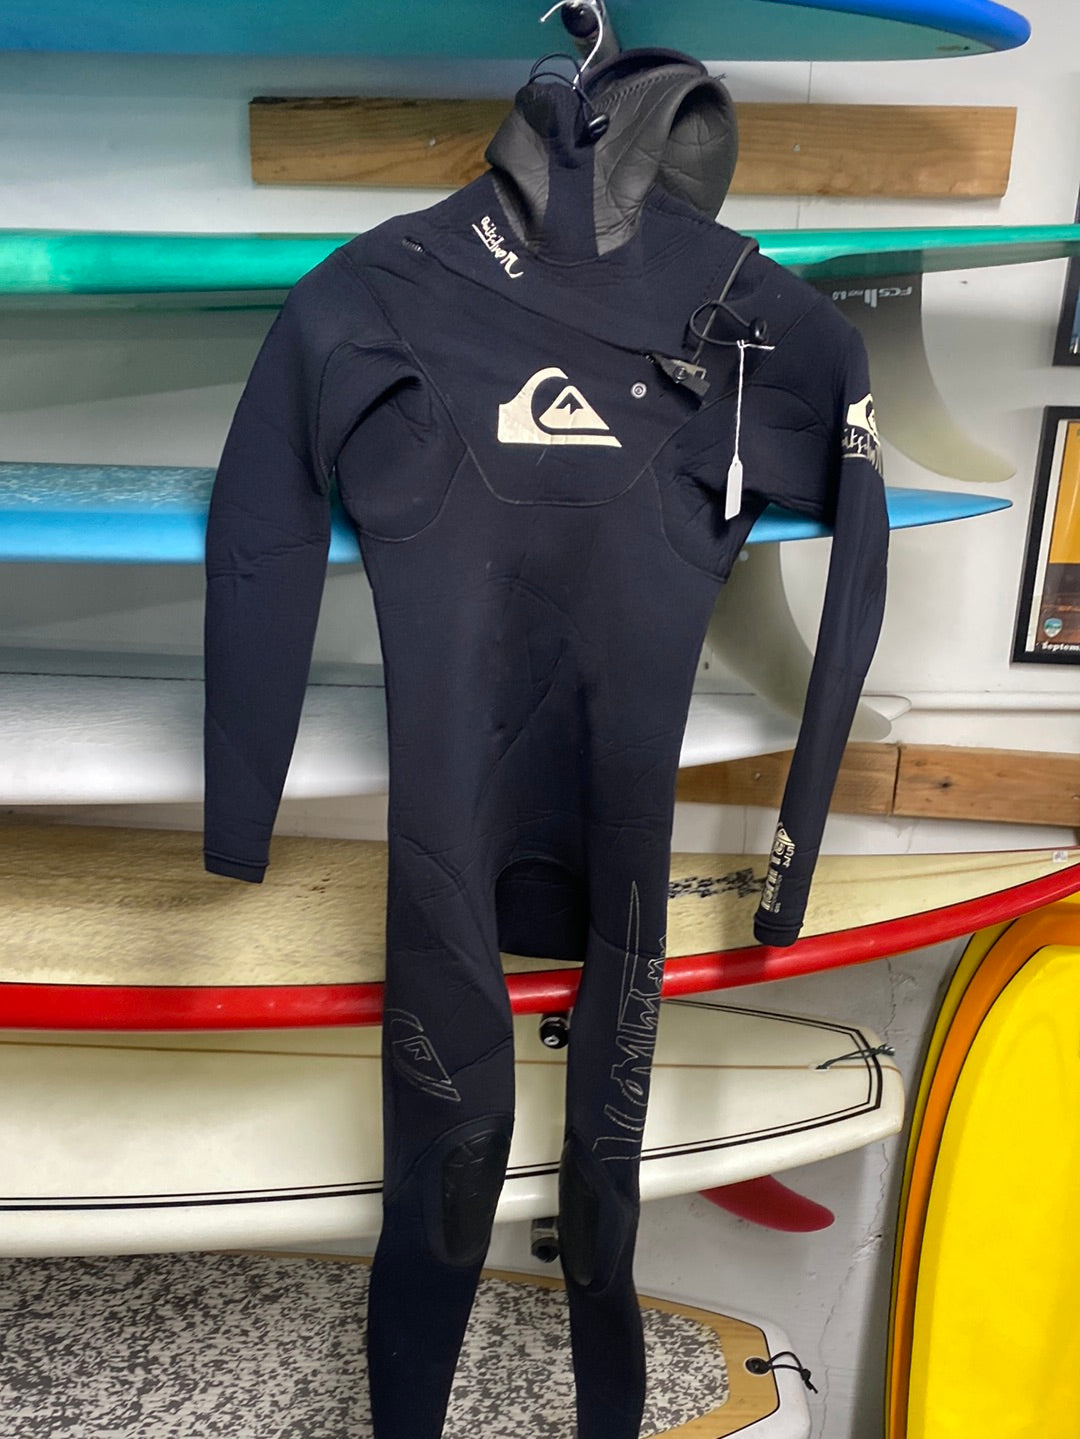 Used 5/4 Quiksilver XS